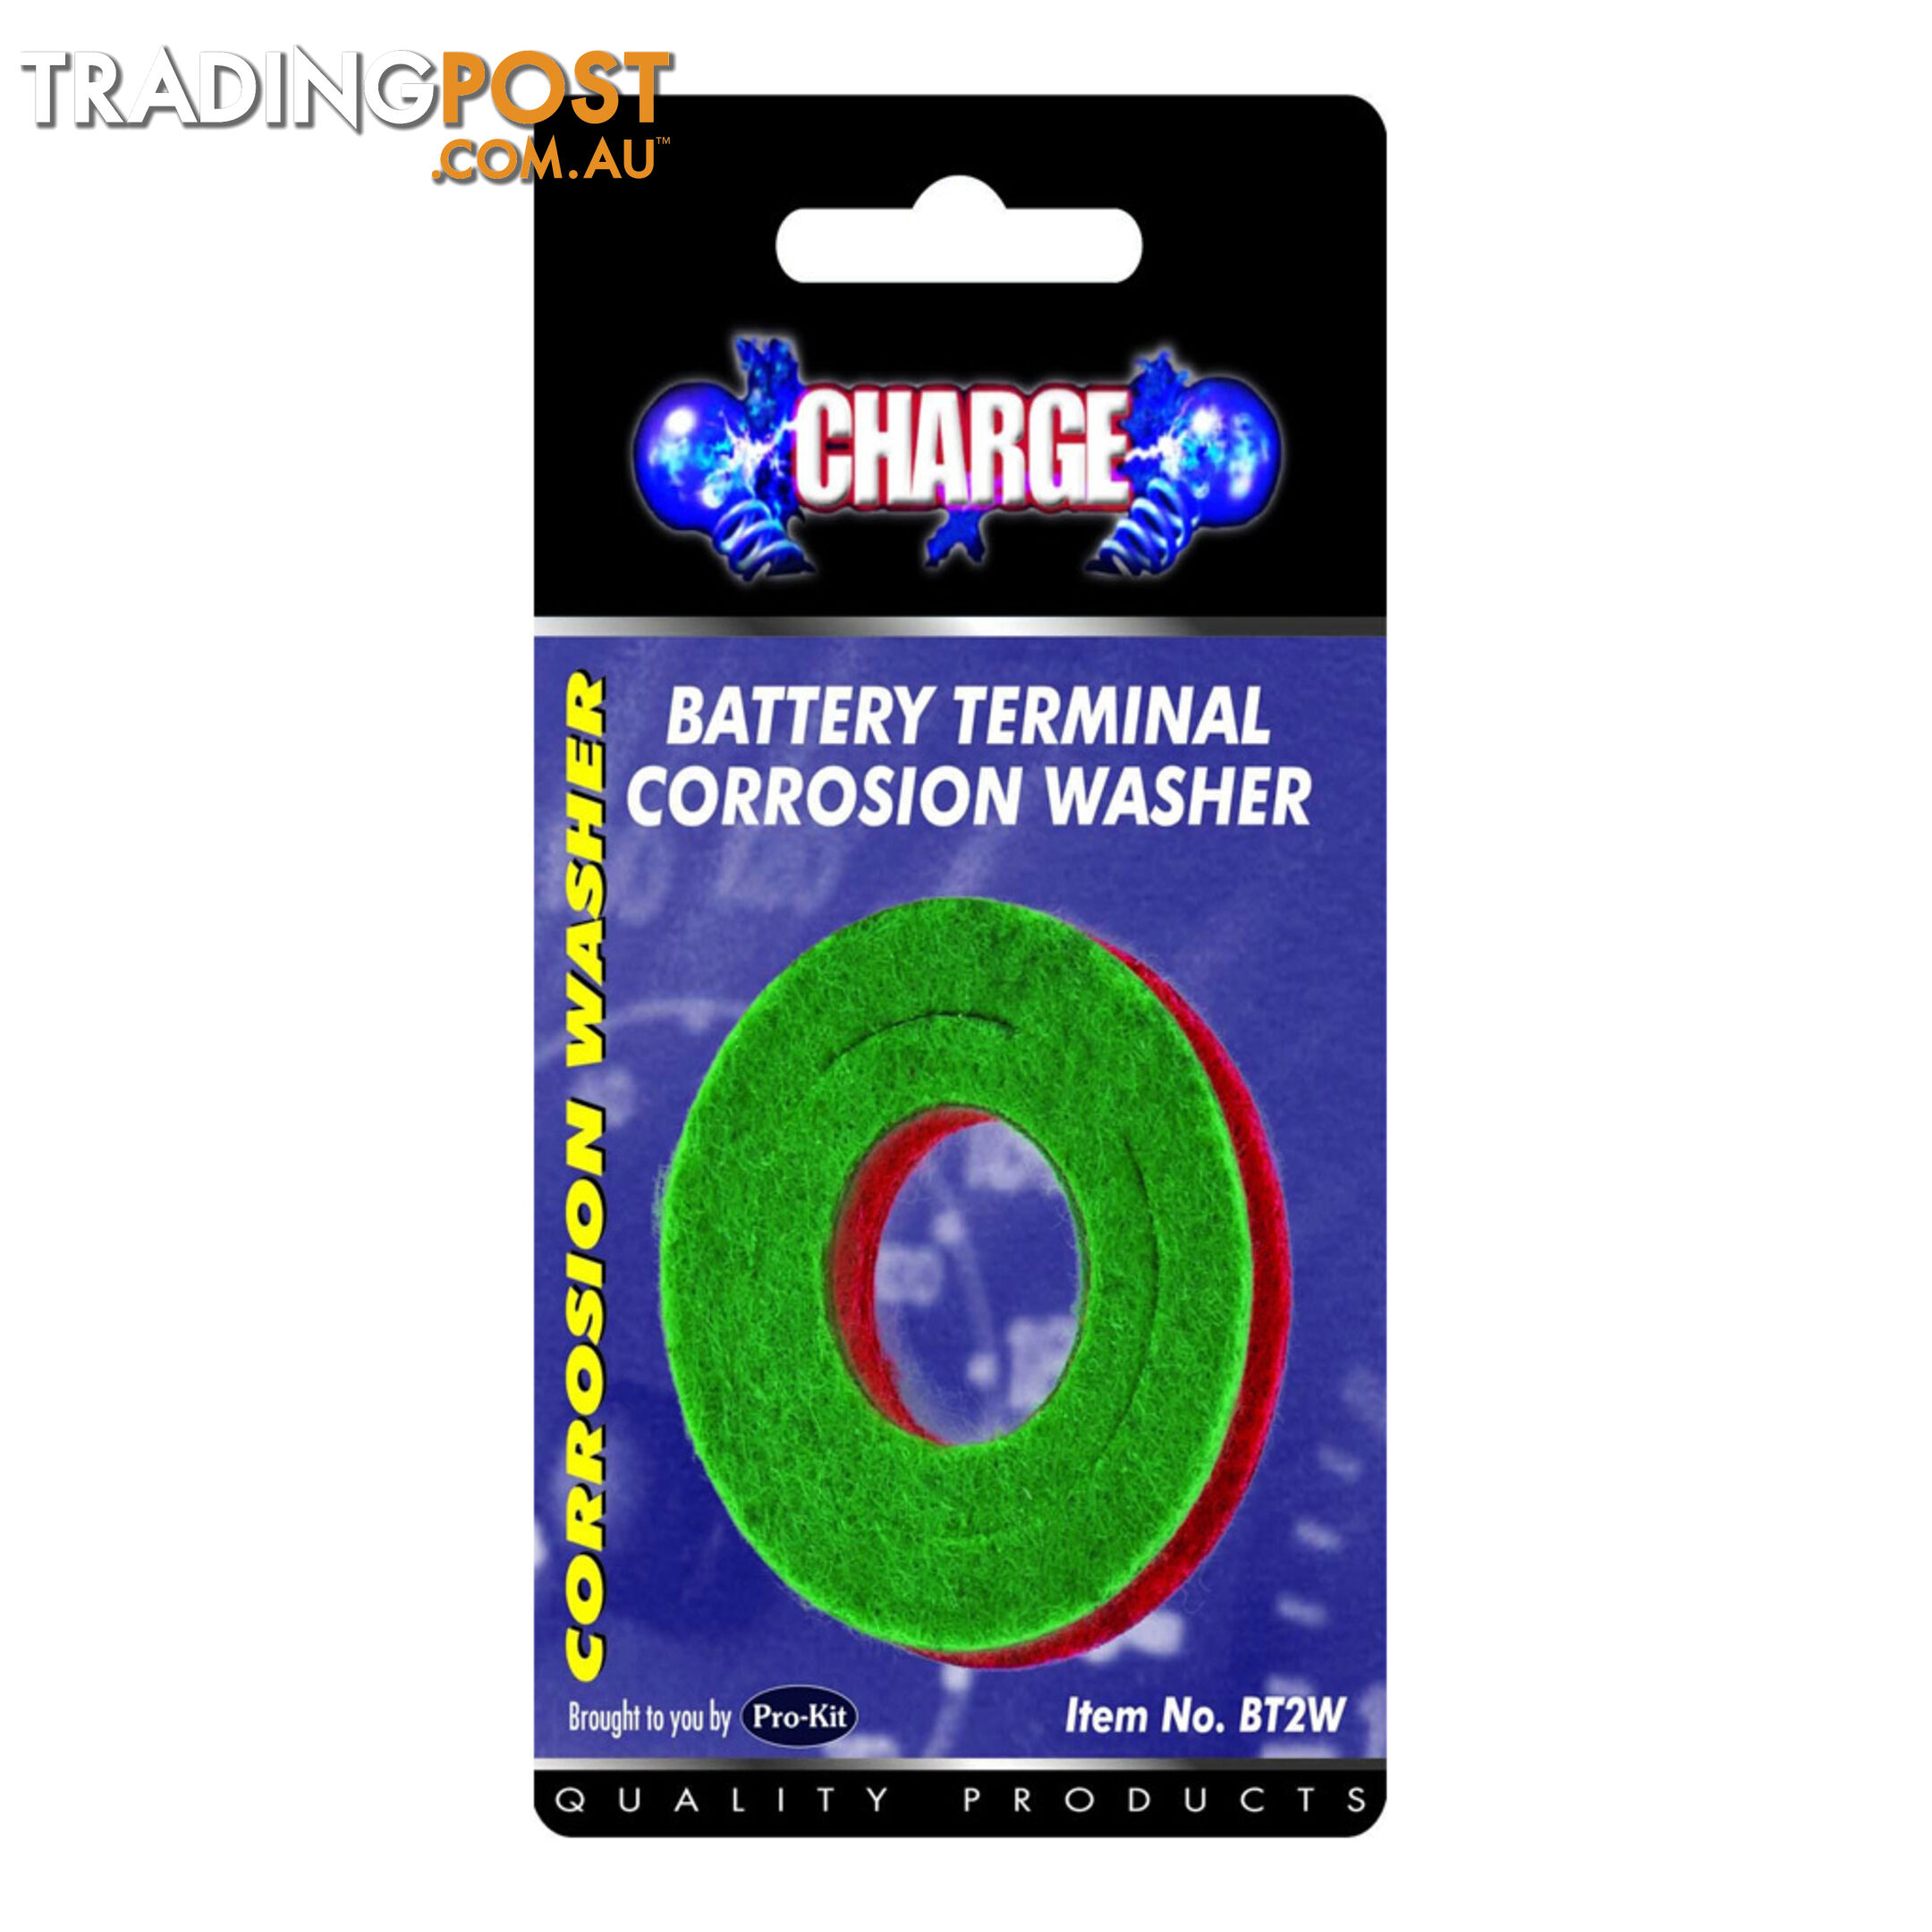 Charge Battery Terminal Corrosion Washer Pair SKU - BT2W